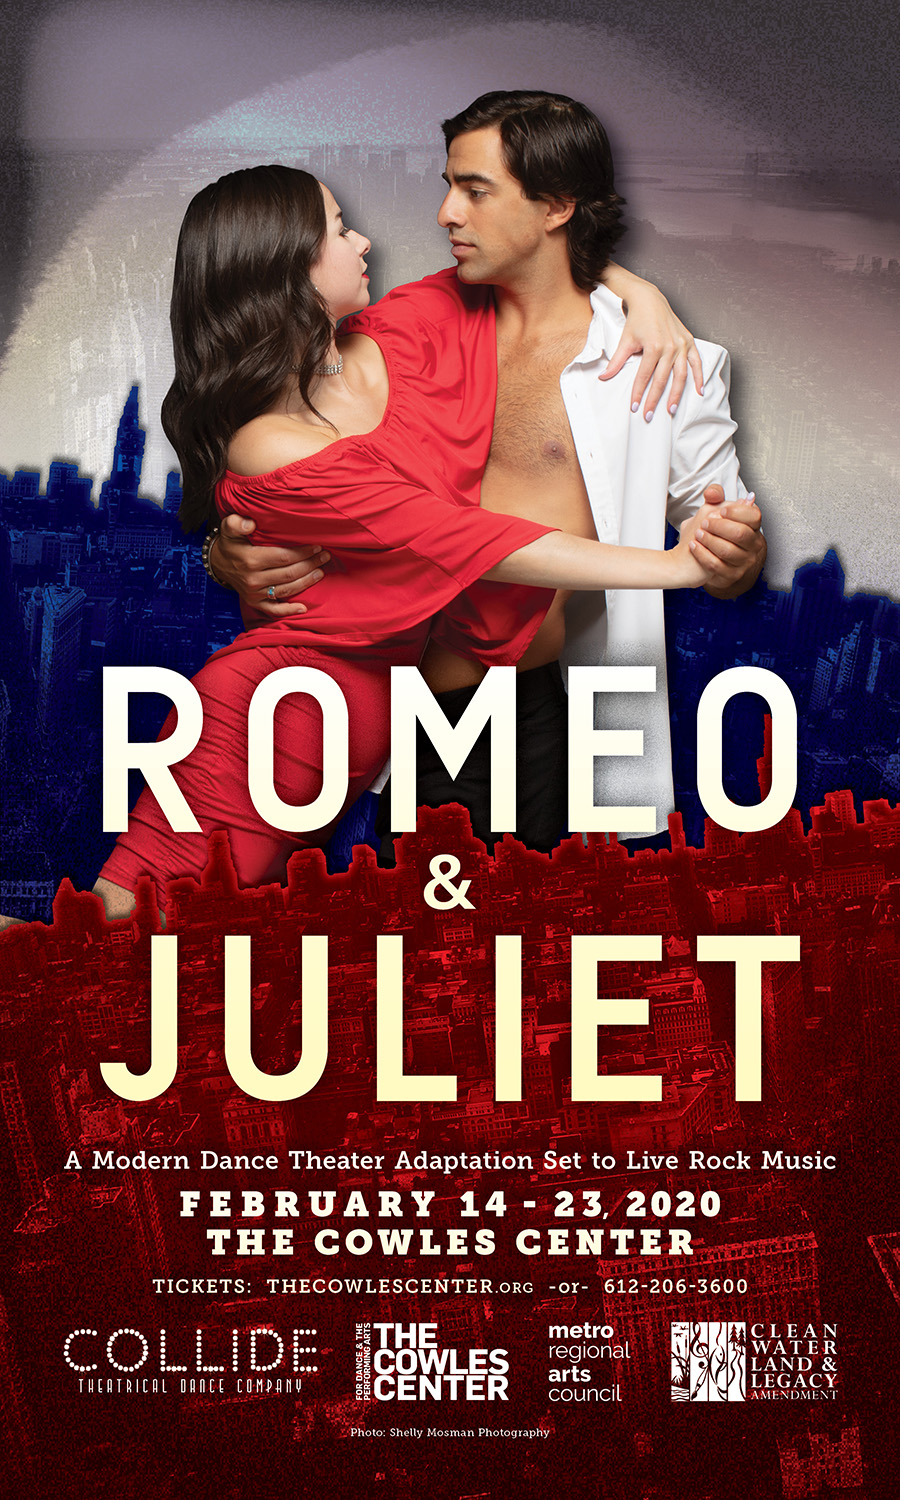 Twin Cities Poster Design for Romeo & Juliet by Collide Theatrical Dance Company at The Cowles Center, Minneapolis, MN